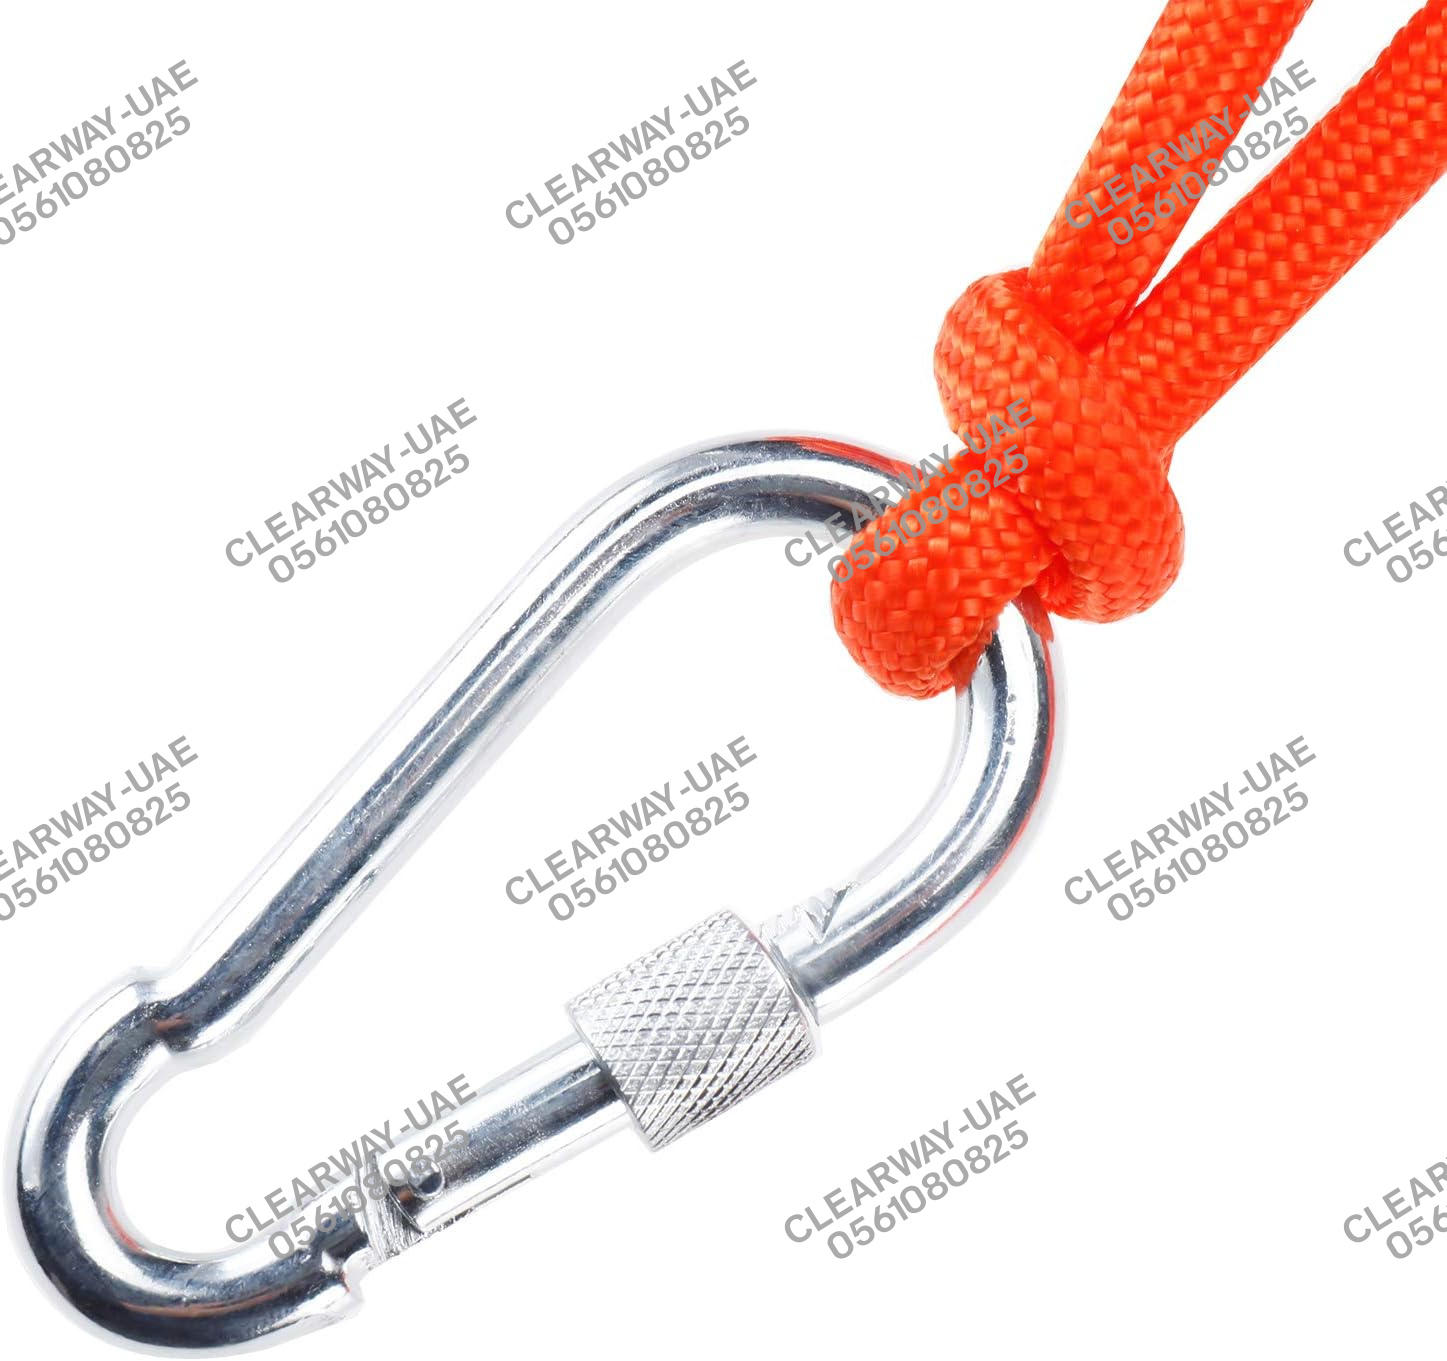 FLOATING LIFE SAVING ROPE SUPPLIER IN ABUDHABI UAE CLEARWAY RYXO SAFETY6